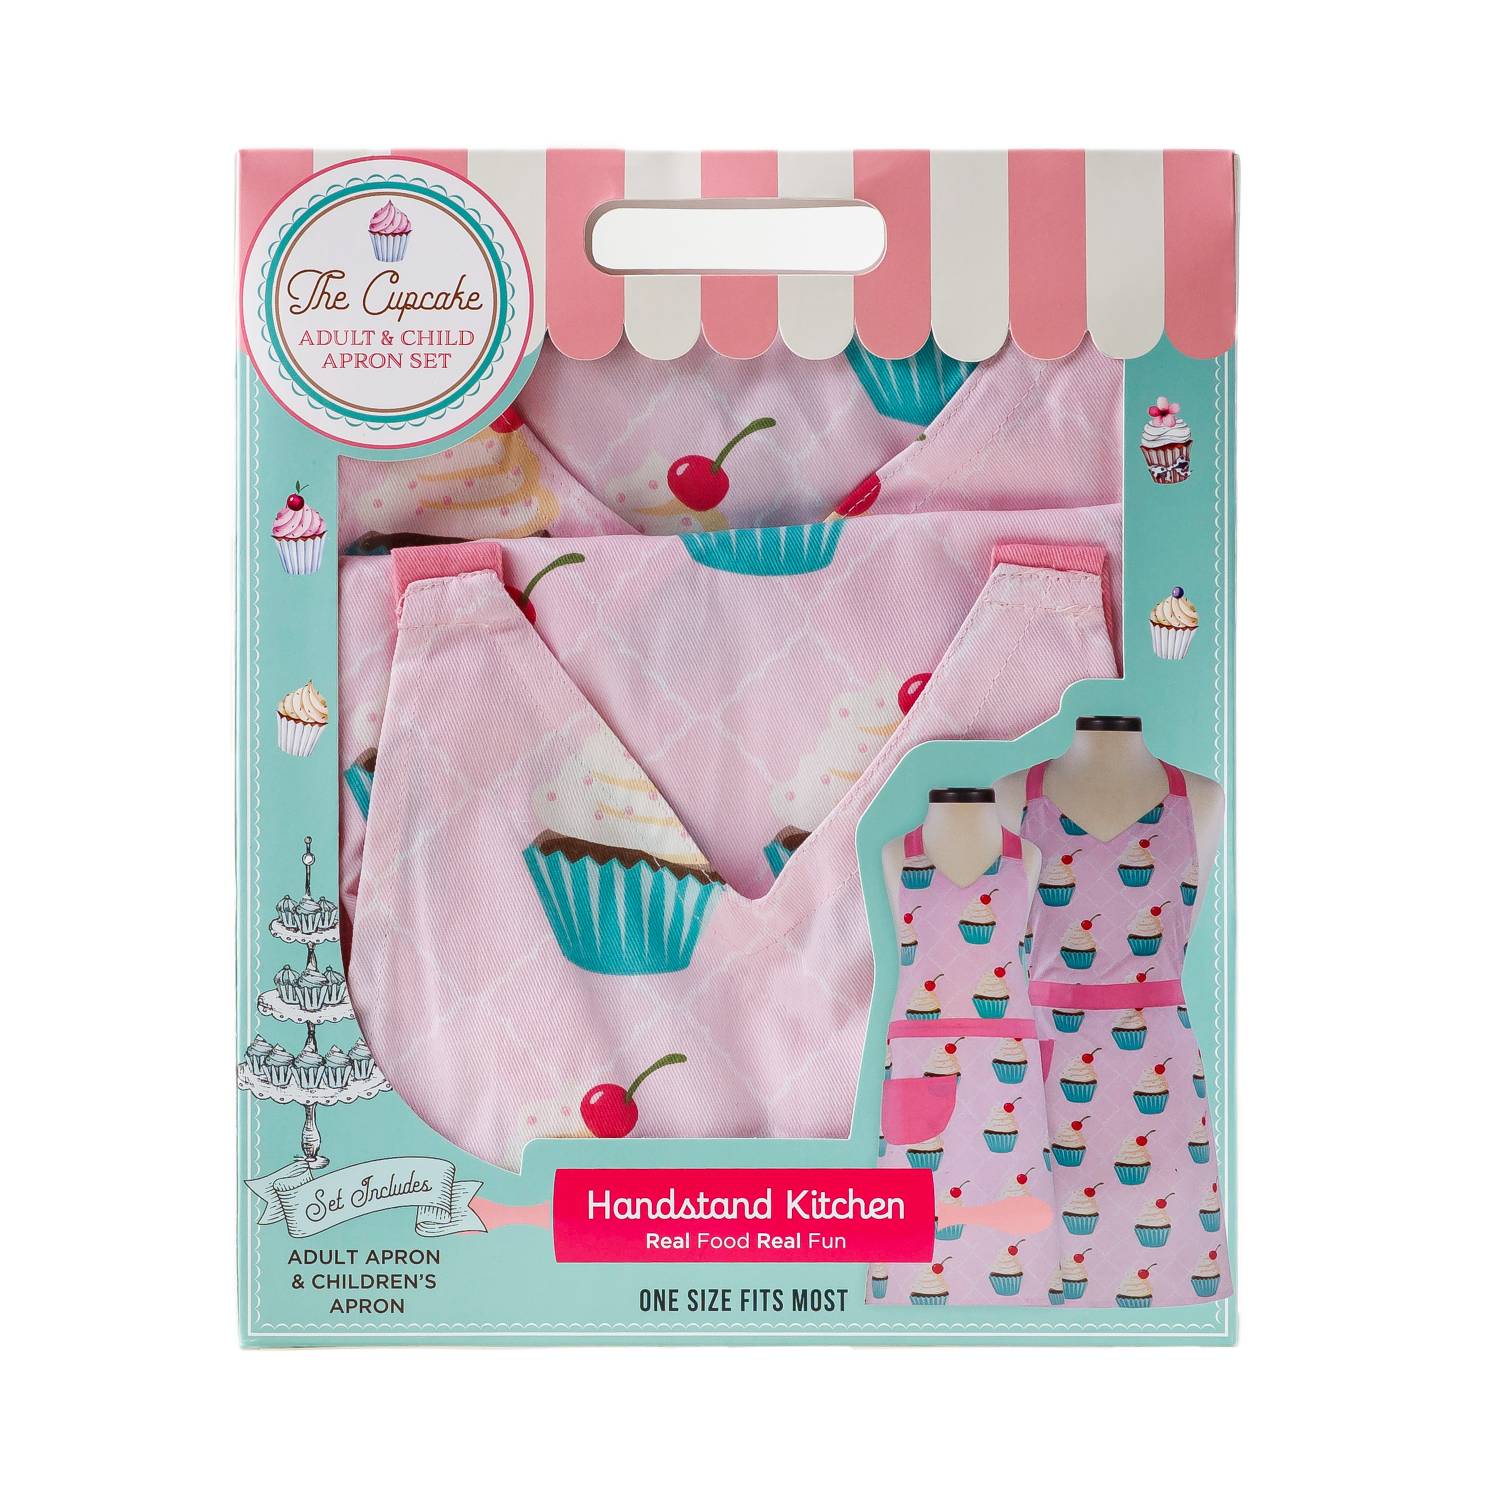 2 Pack Matching Aprons with Pockets for Kids and Adults.Perfect for